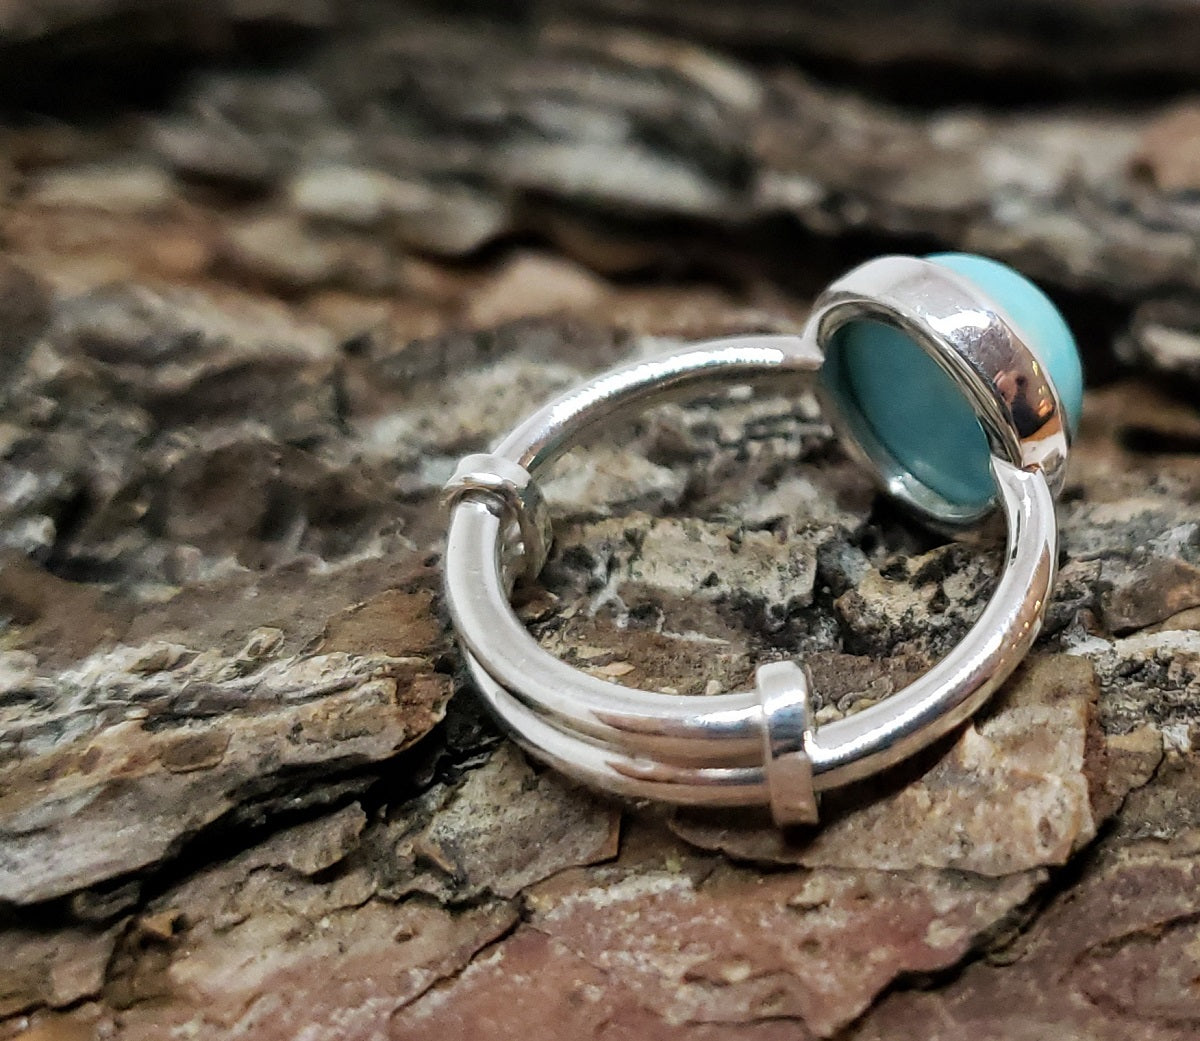 Turquoise Ring - Sterling Silver - Adjustable Size  - Joy#181